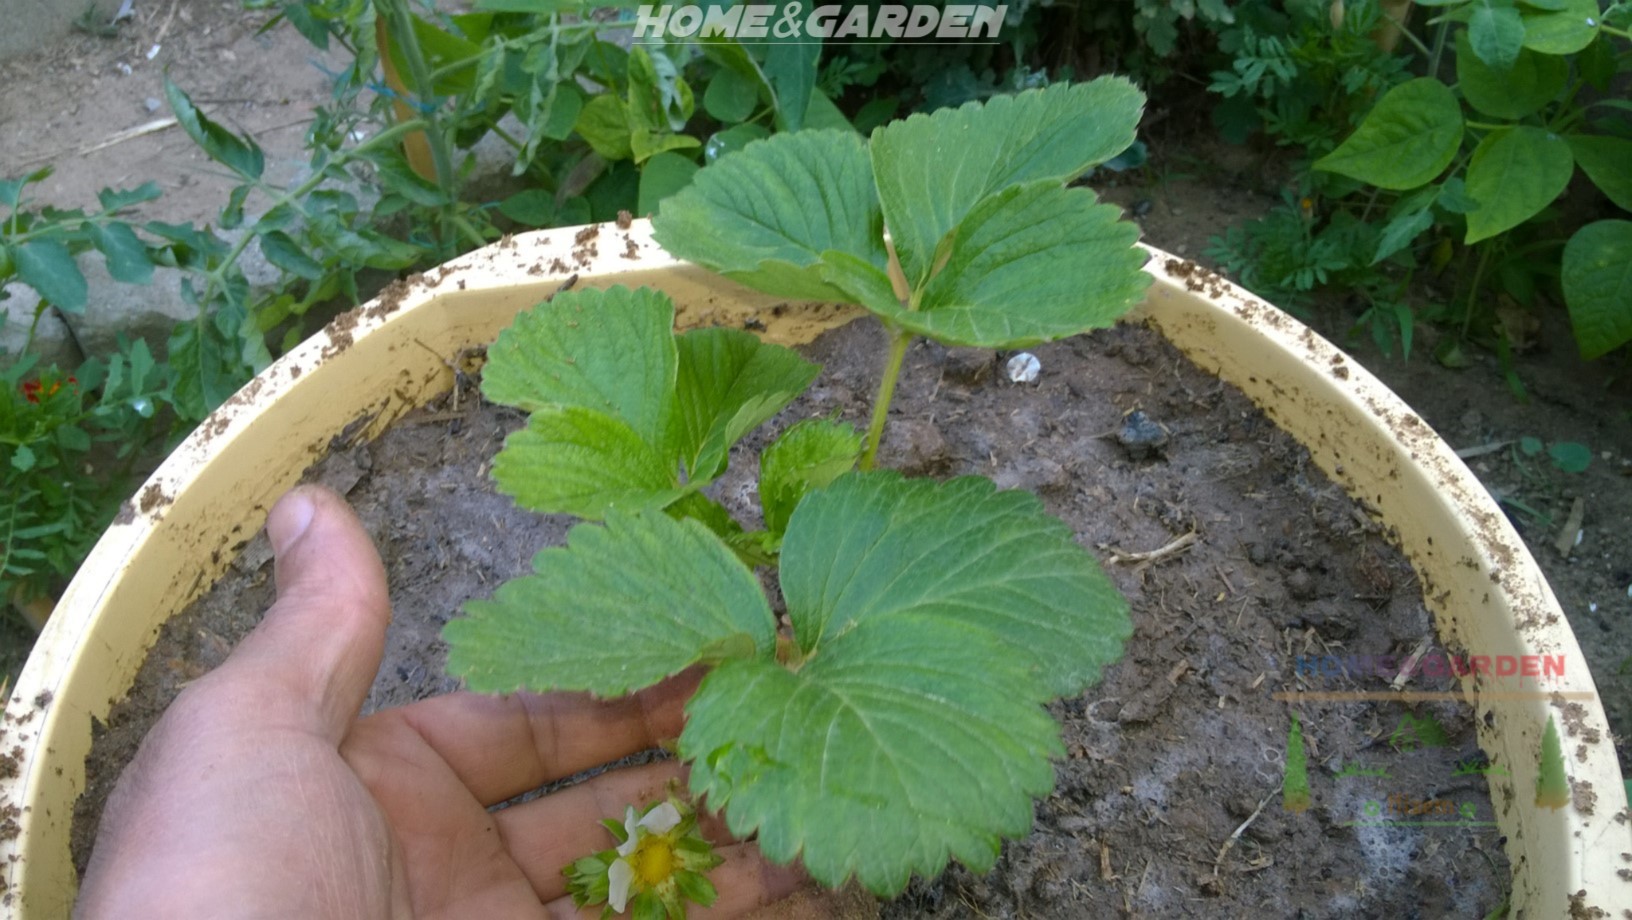 Plant the strawberry plant so the crown is just above the soil surface. Then, cover up to the crown with the soil, add more soil, as needed, after water very well.